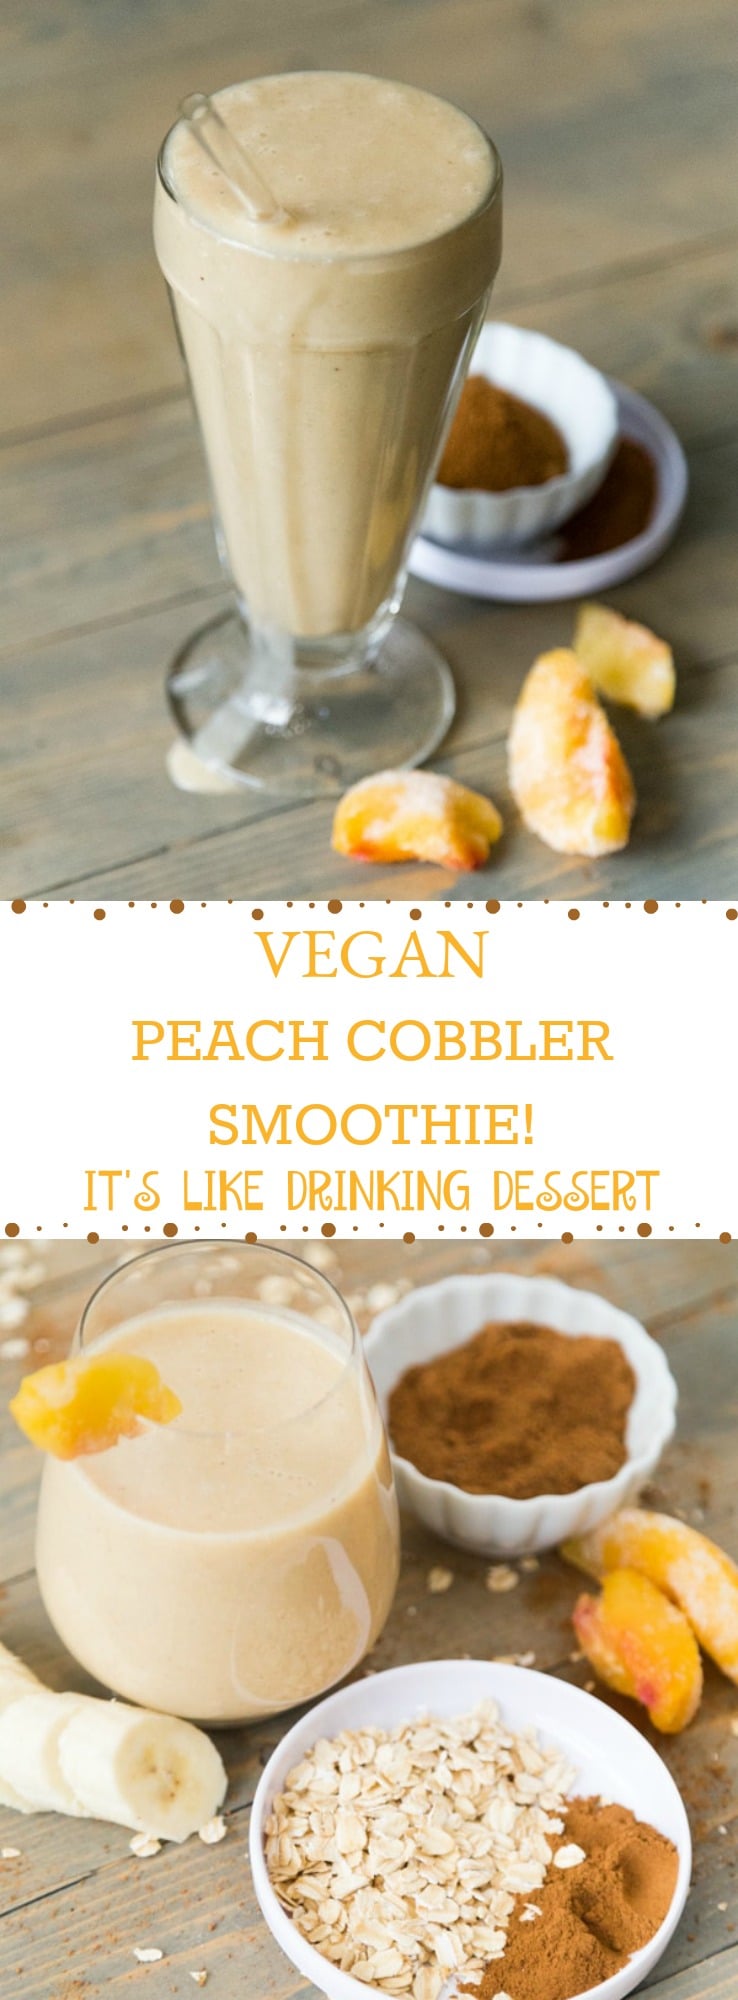 A delicious vegan smoothie that tastes like a peach cobbler. It's dessert without the guilt! #peachcobbler #dessert #smoothie #vegan #healthy